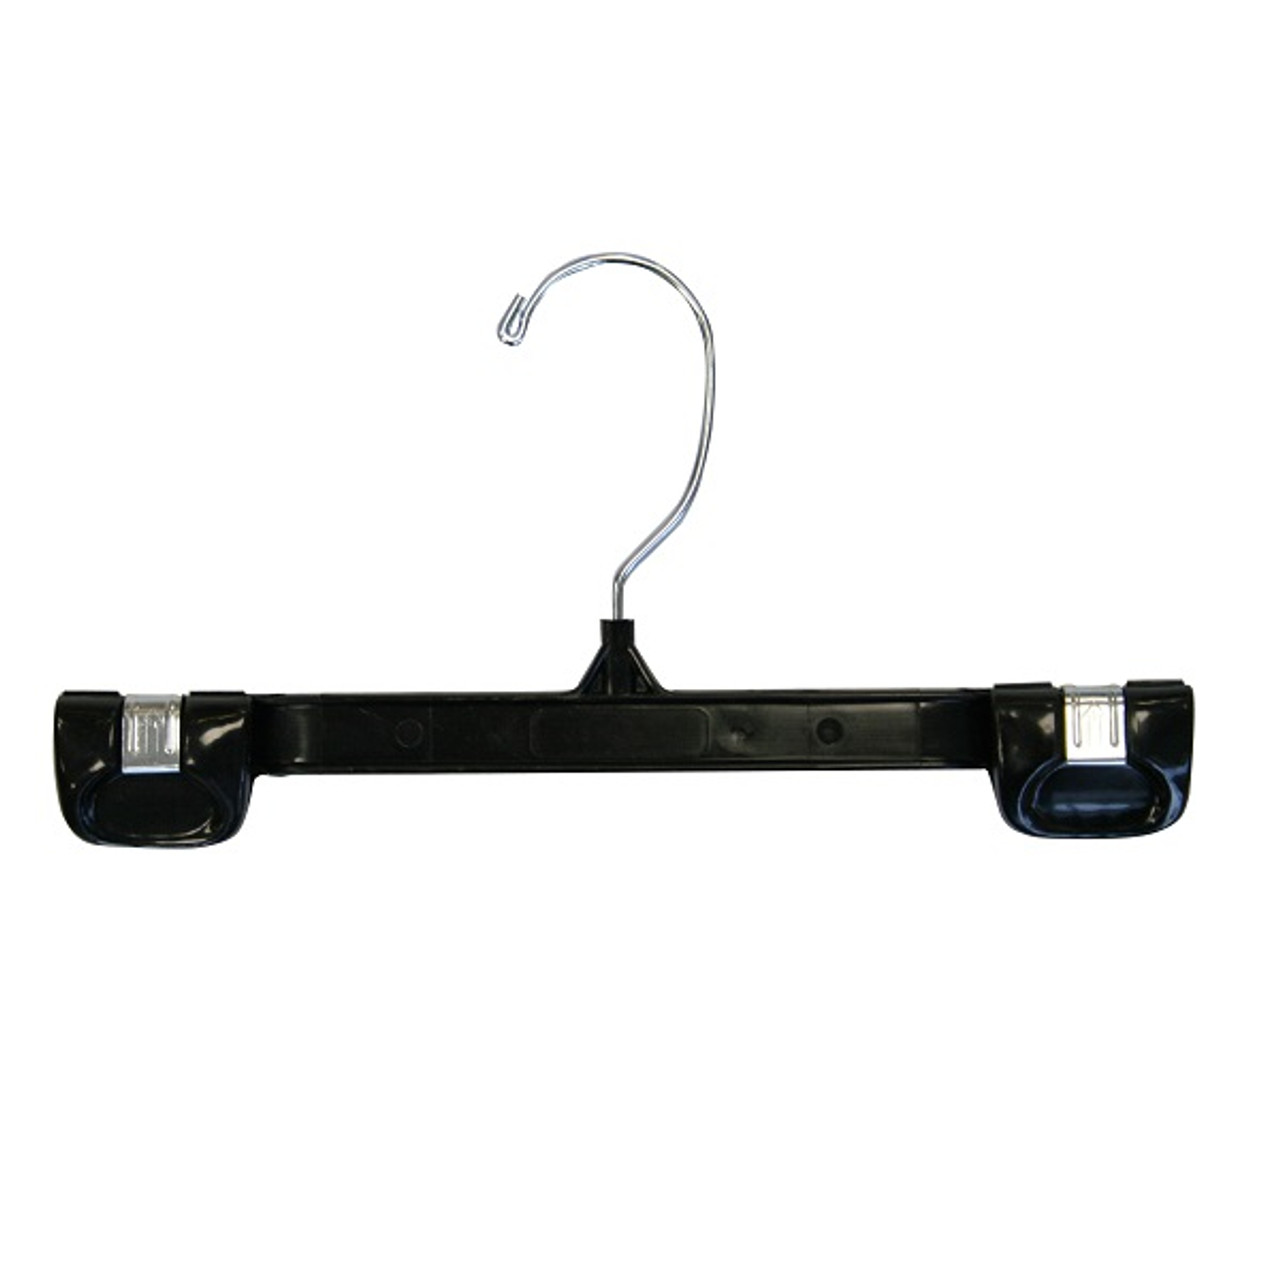 10" Black Adult/Youth Skirt or Pant Hanger with Metal Hook per 100